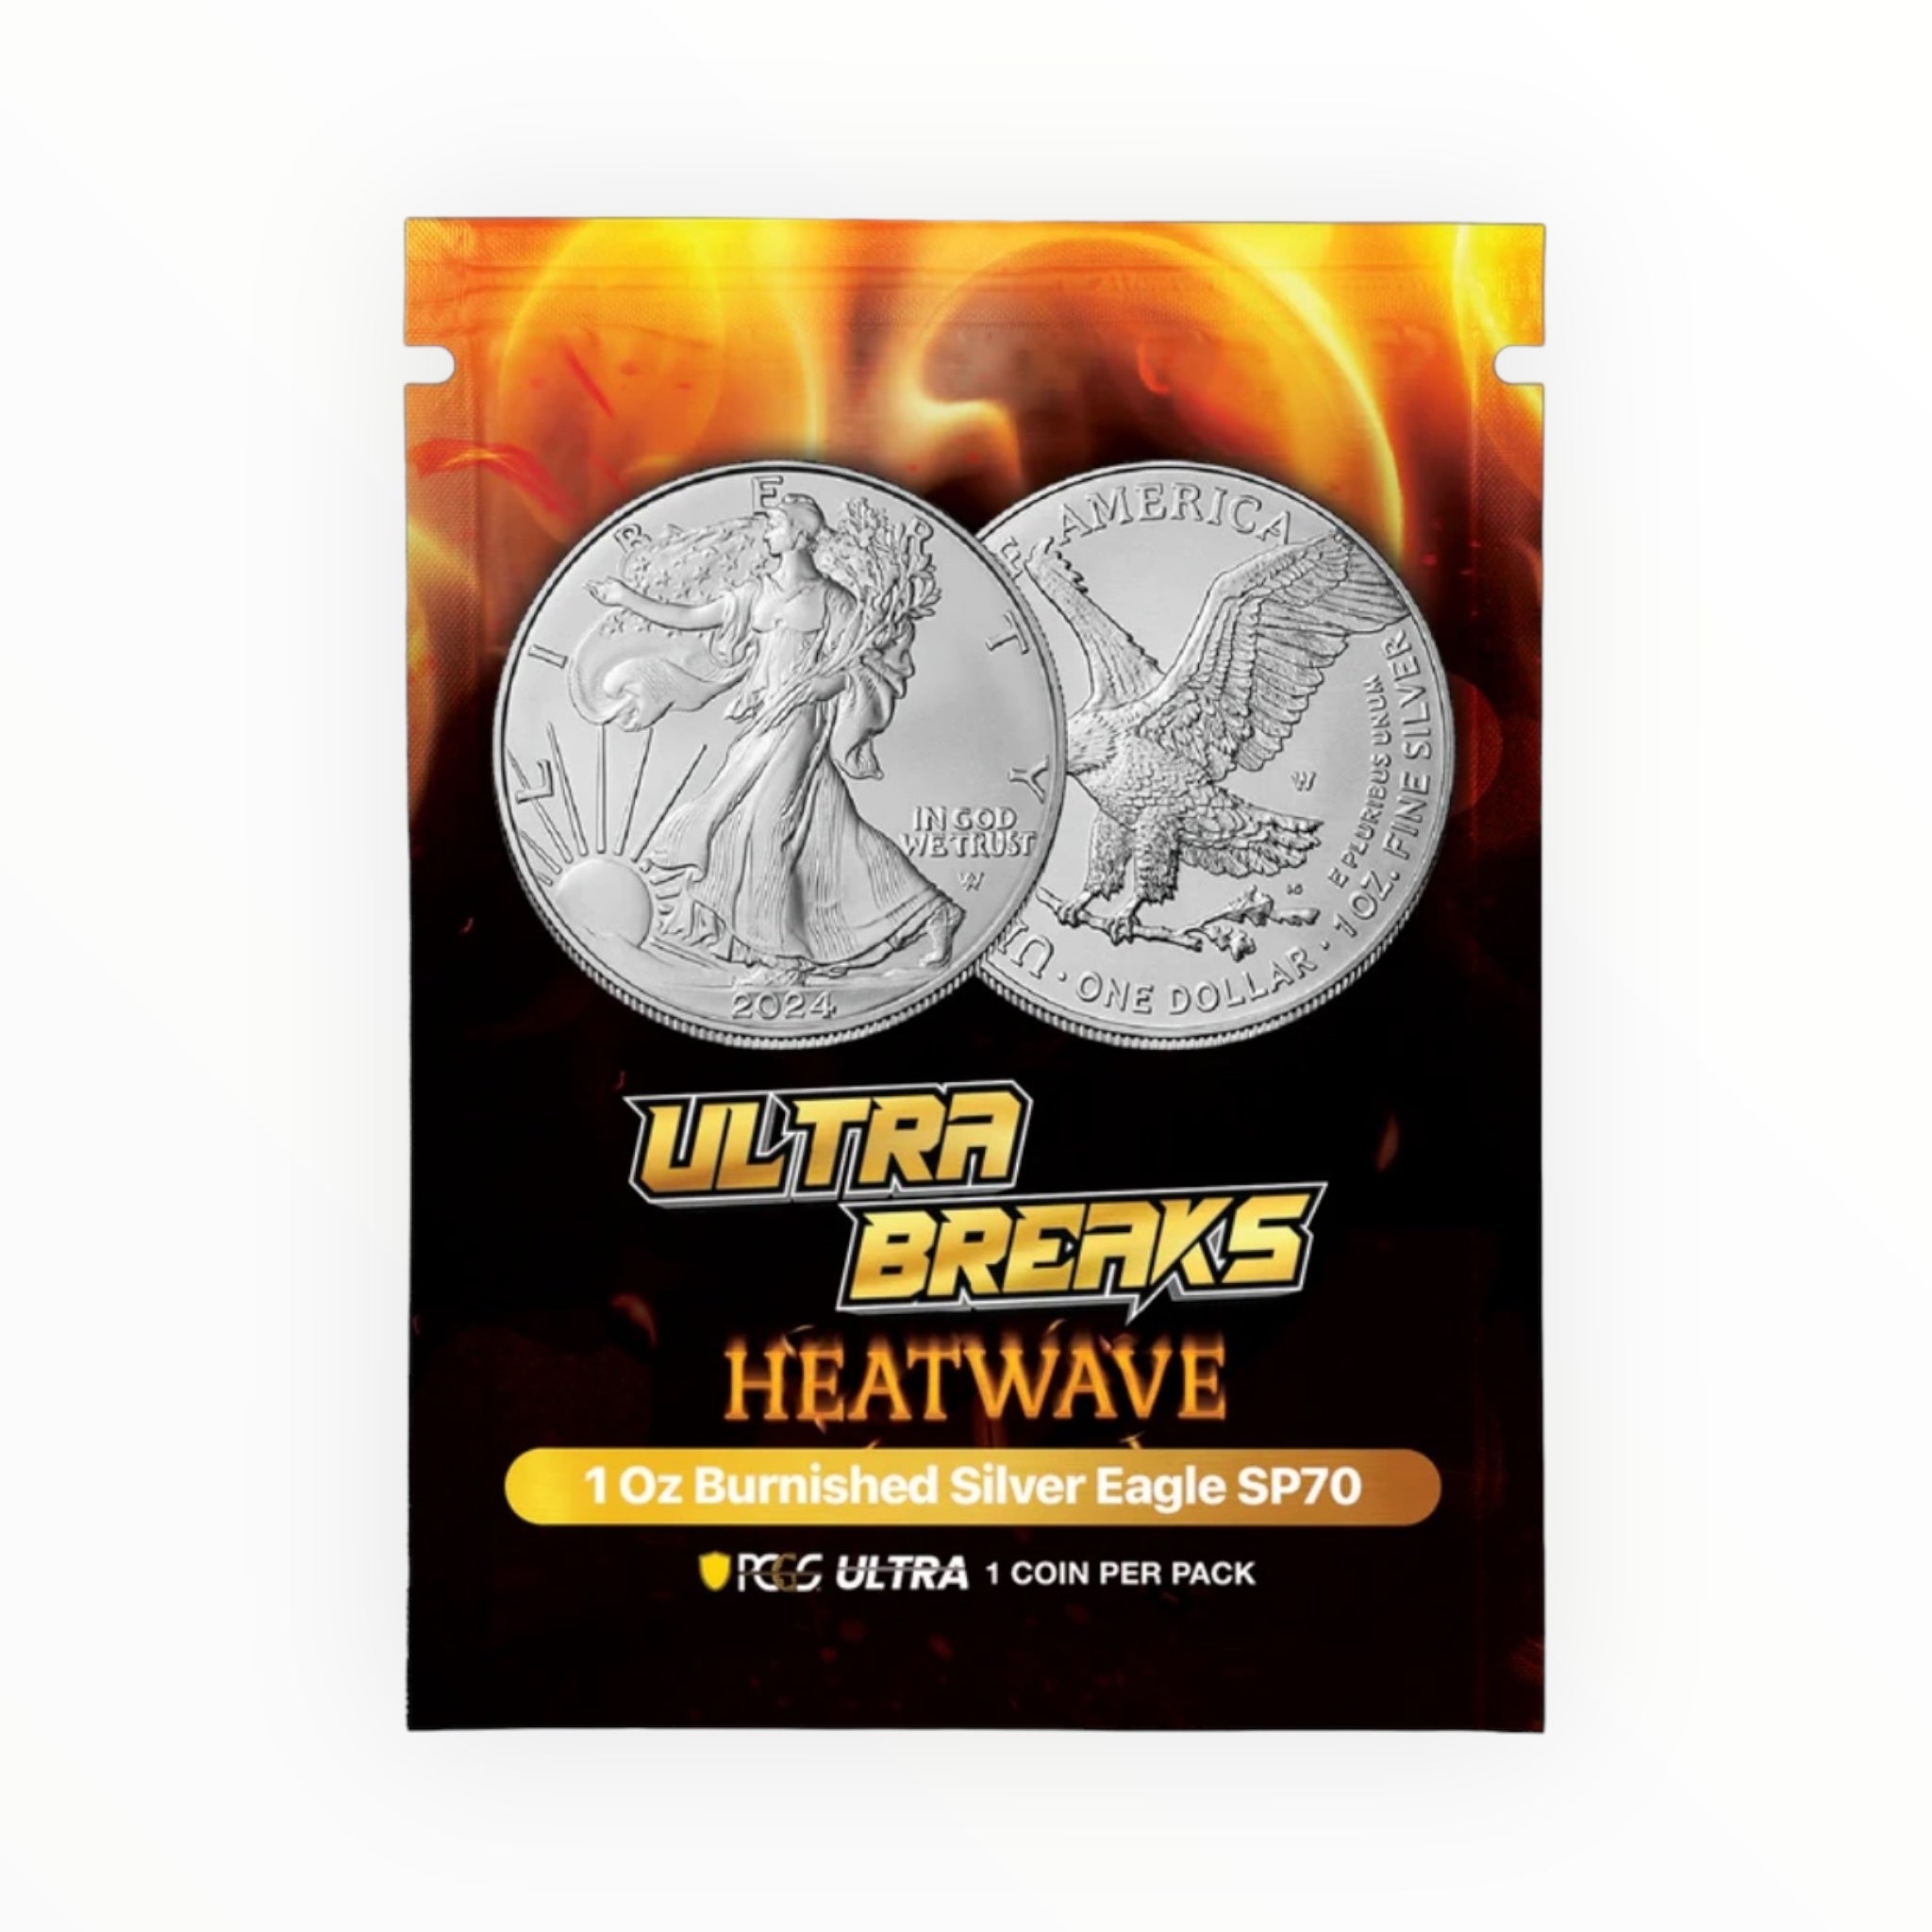 UltraBreaks Heatwave: Featuring 1 Oz Burnished Silver Eagle & Gold Chase Coins